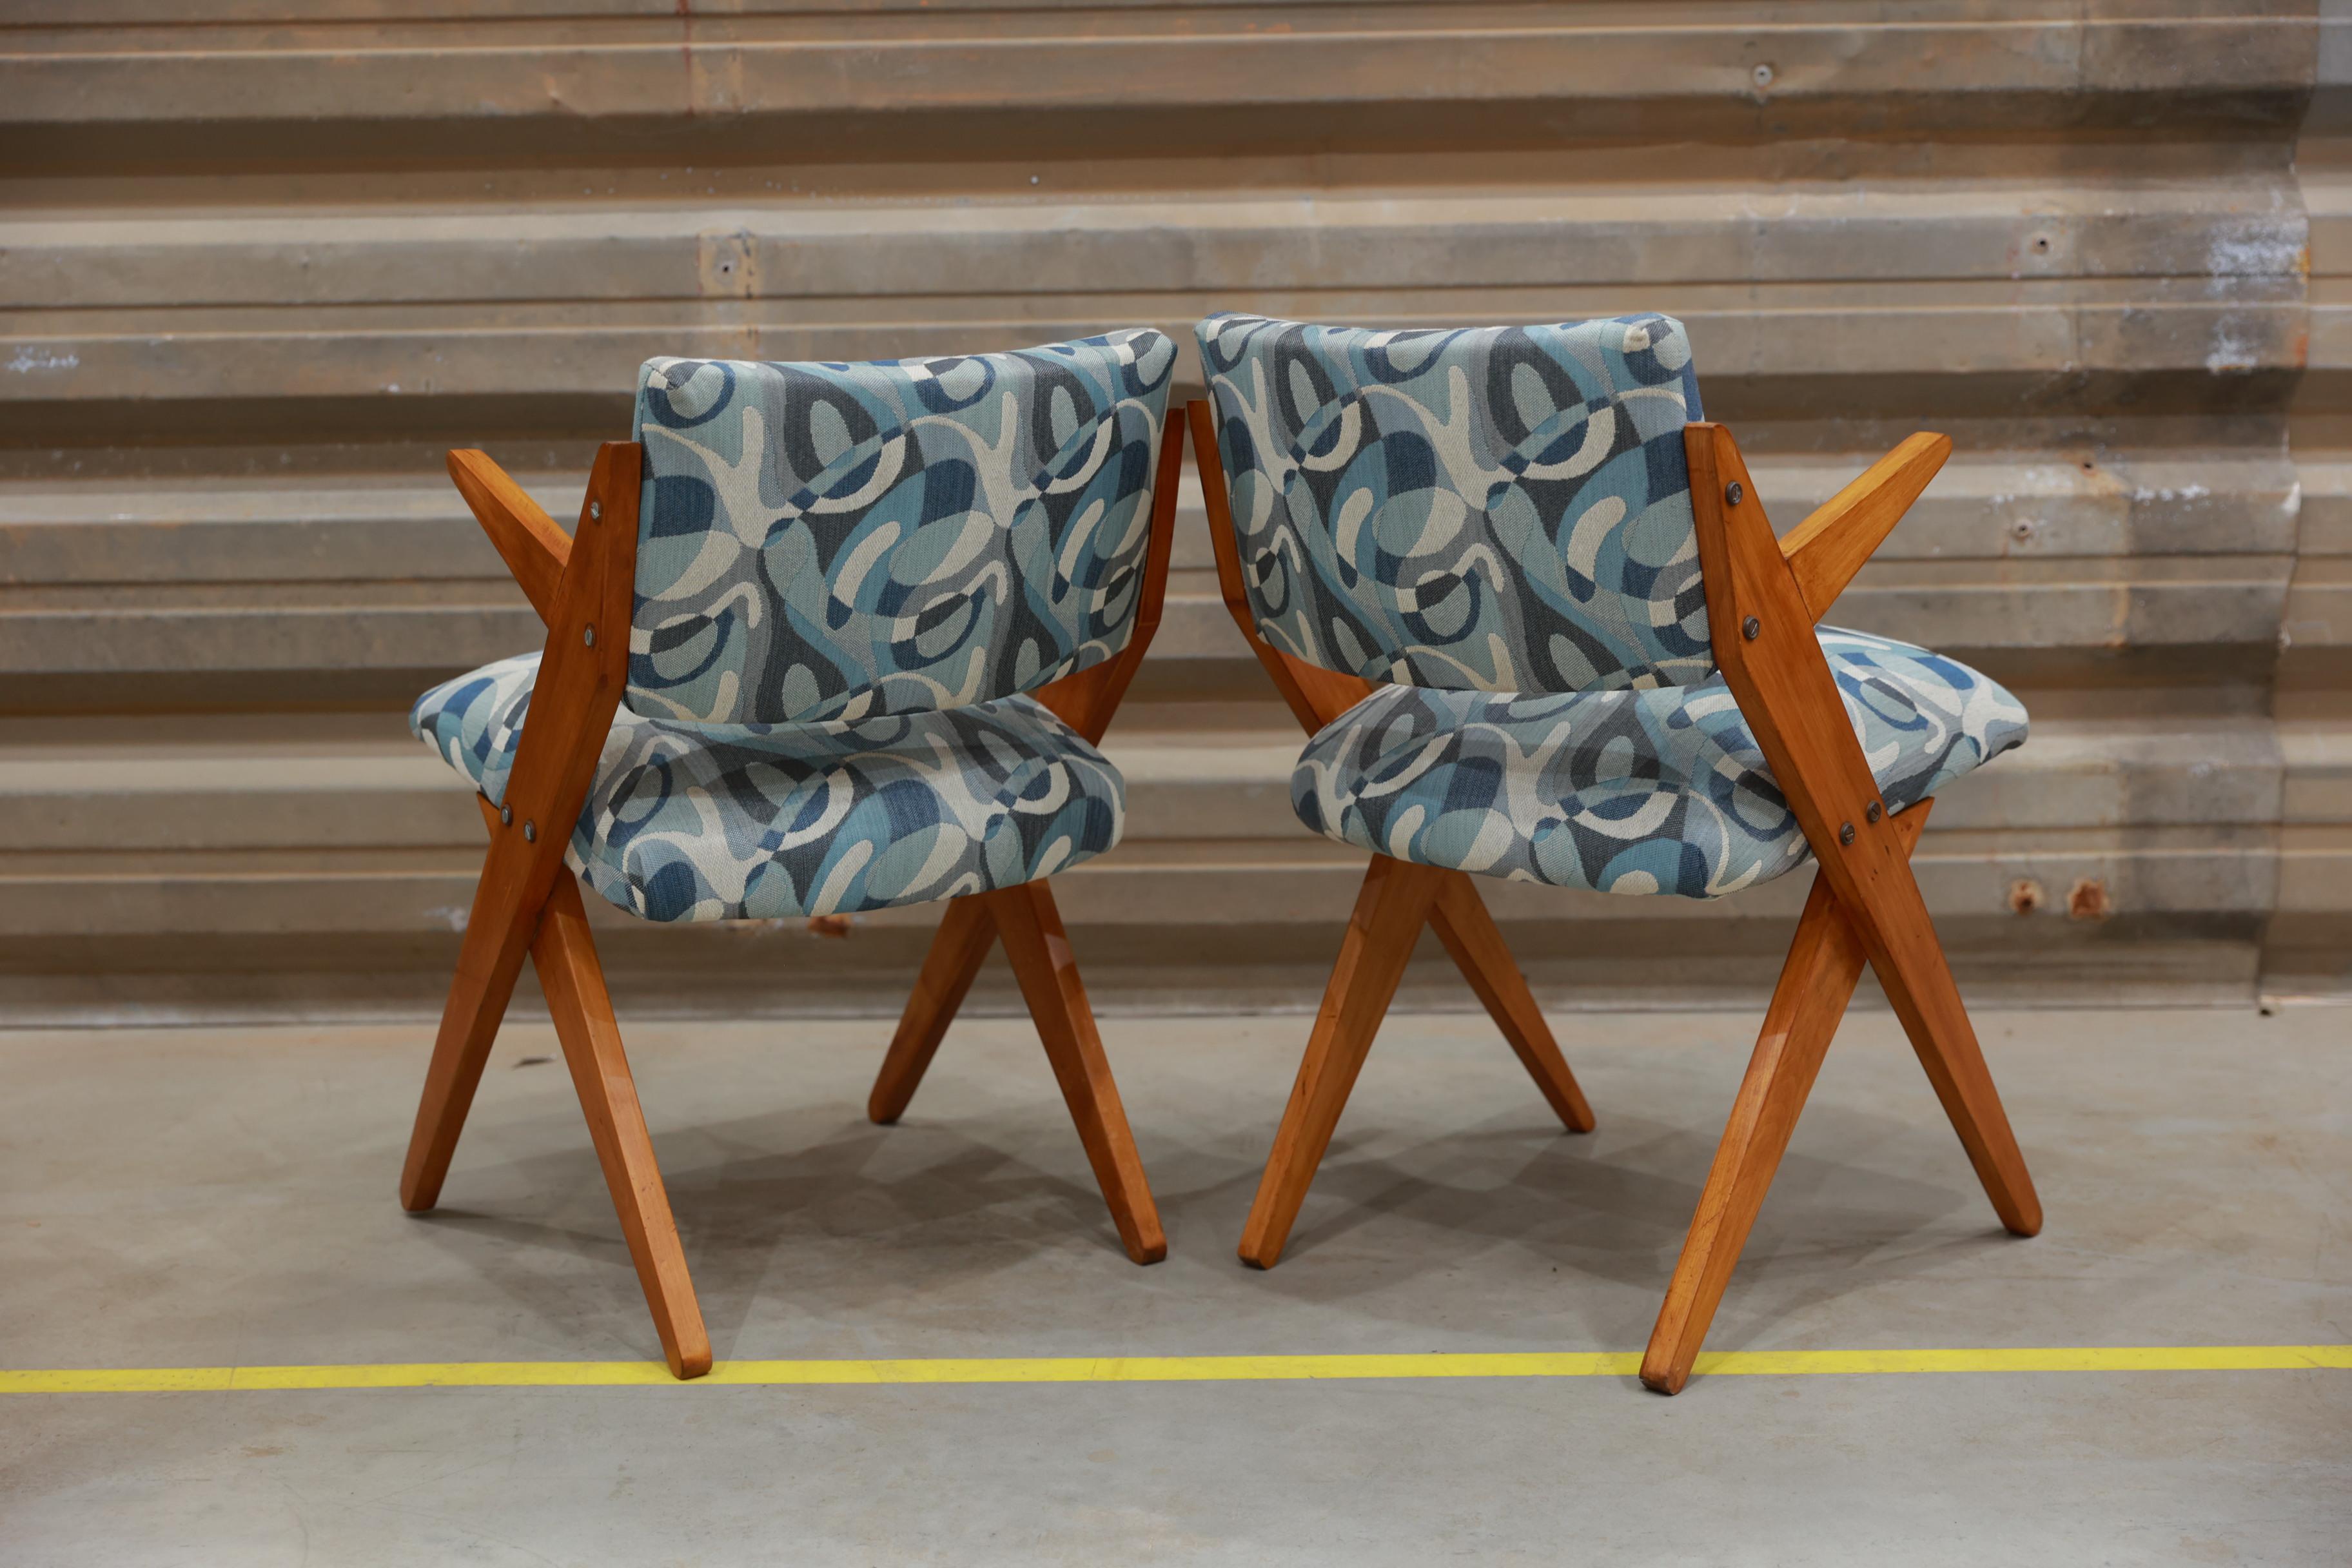 Hand-Crafted Brazilian Modern Armchairs in hardwood & floral upholstery by Jose Zanine Caldas For Sale